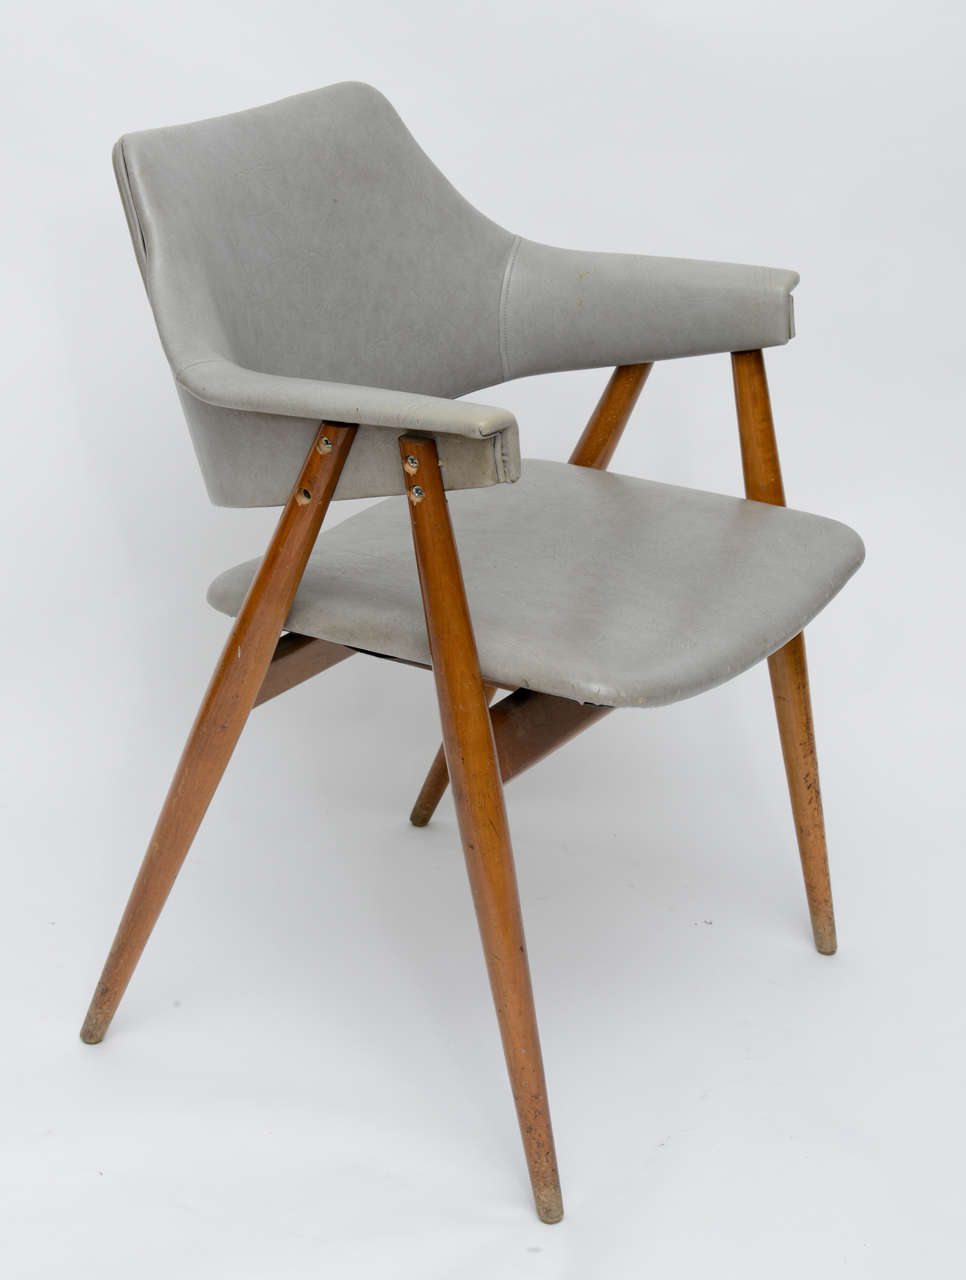 Mid-Century Modern Wooden MCM chair attributed to Paul McCobb 1950